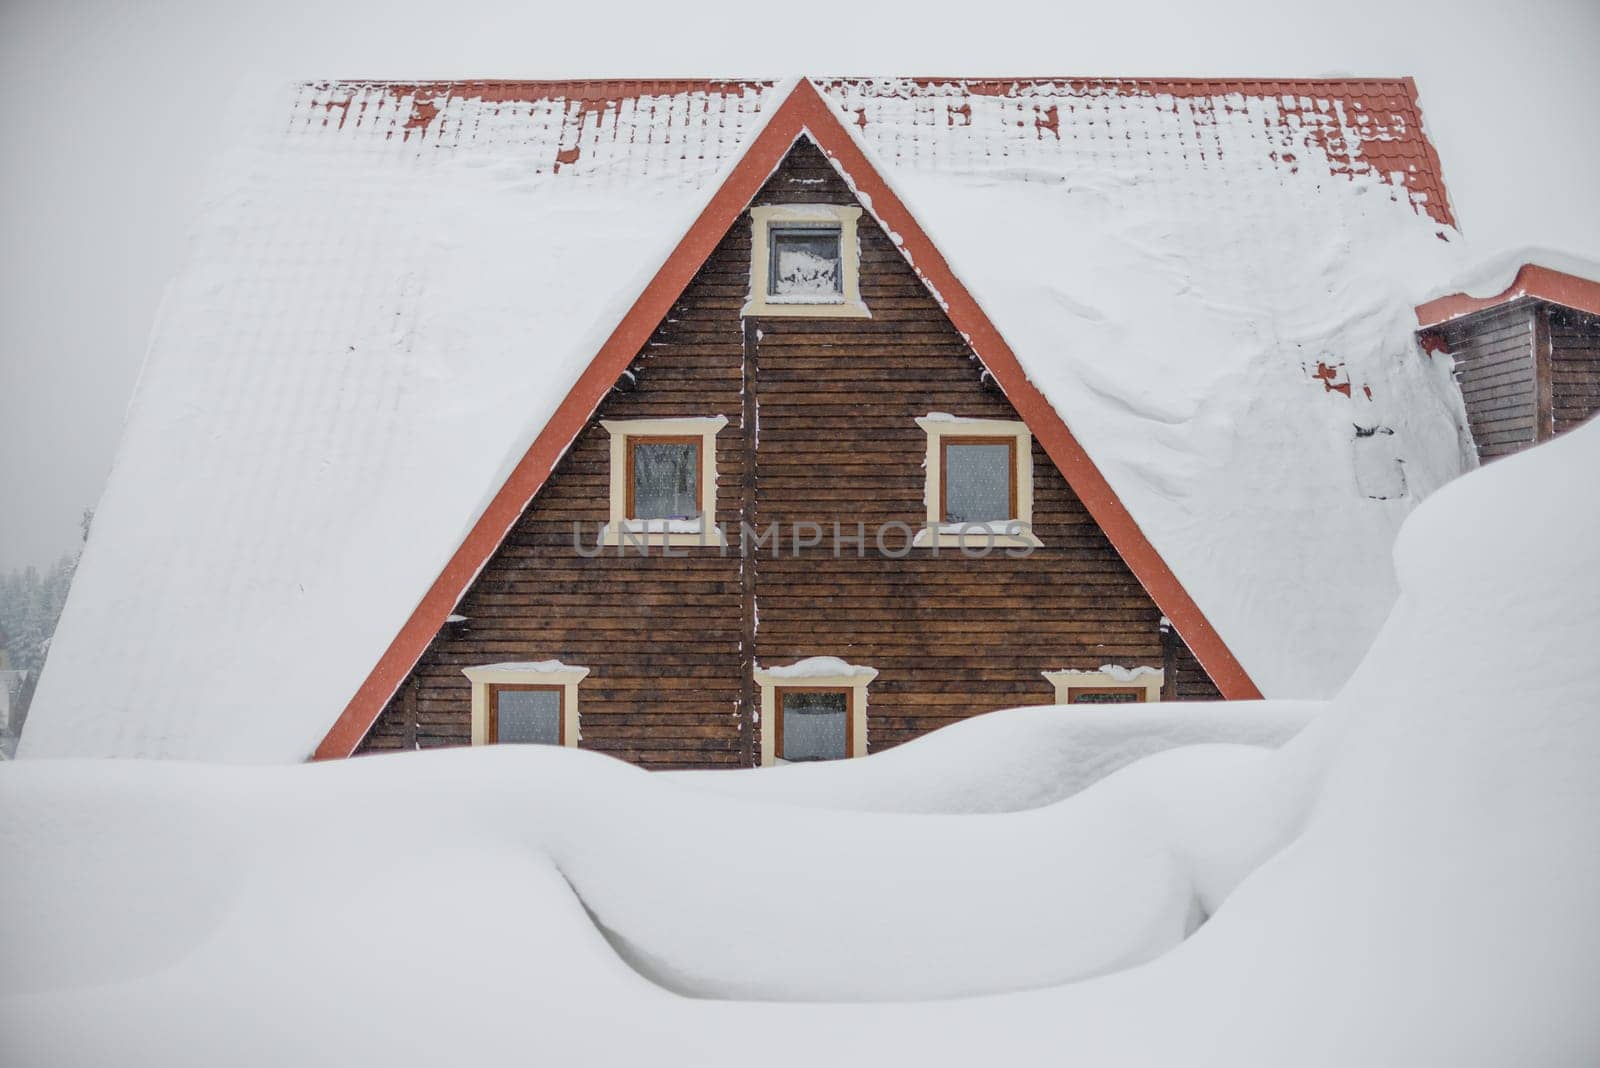 The roof of a wooden house. Large snow drifts. Triangular roof with windows. by Renisons